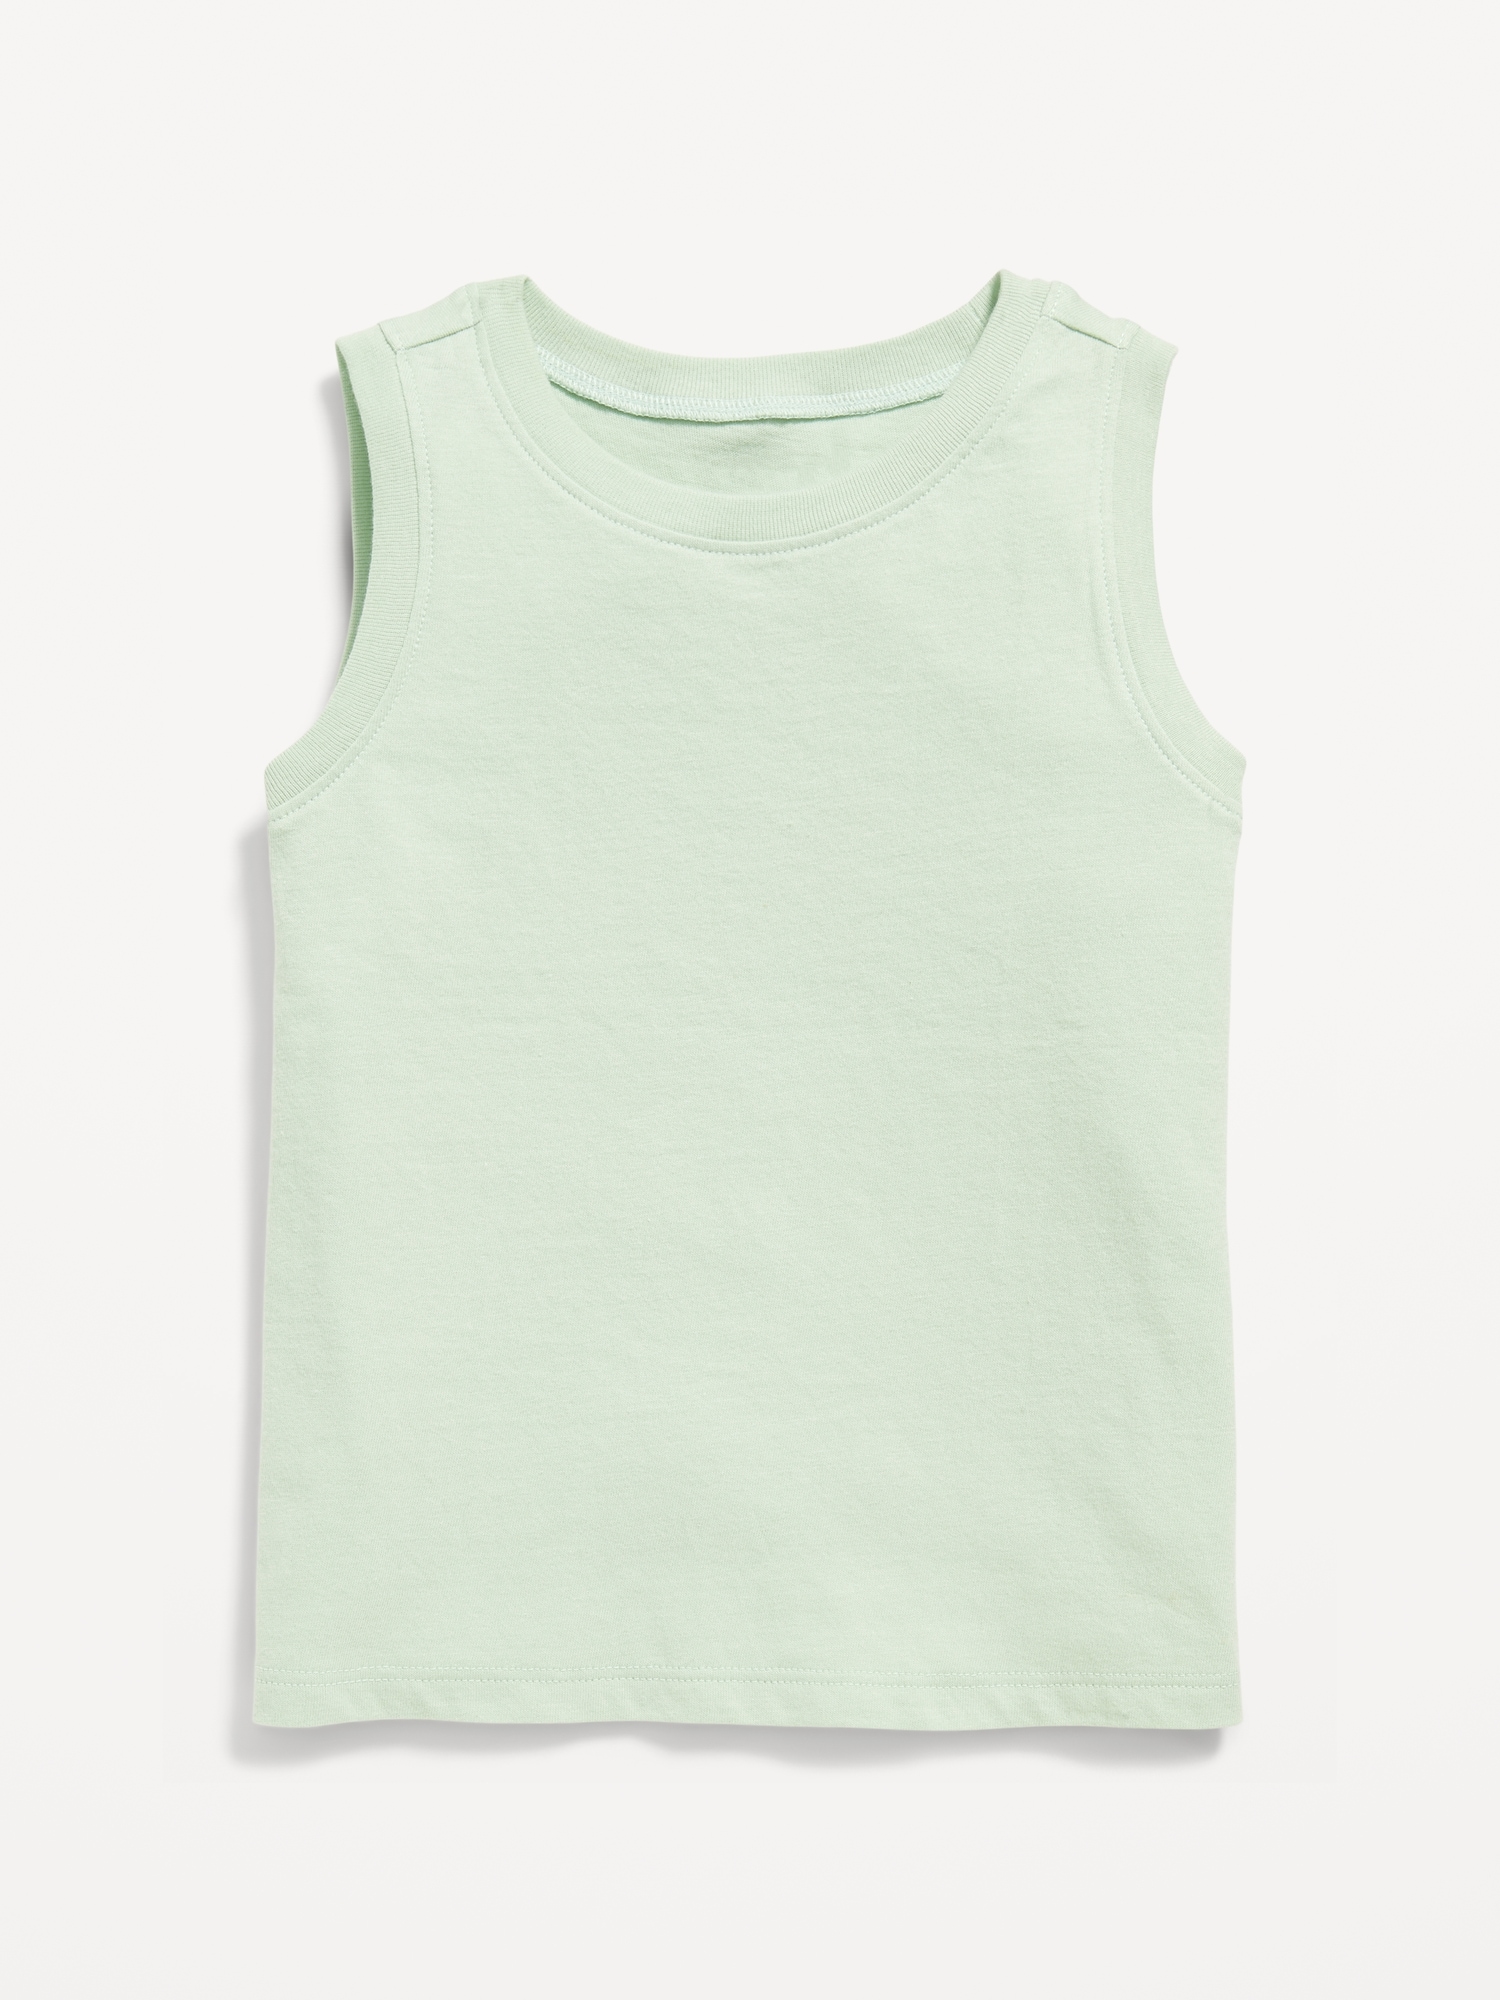 Printed Tank Top for Toddler Boys